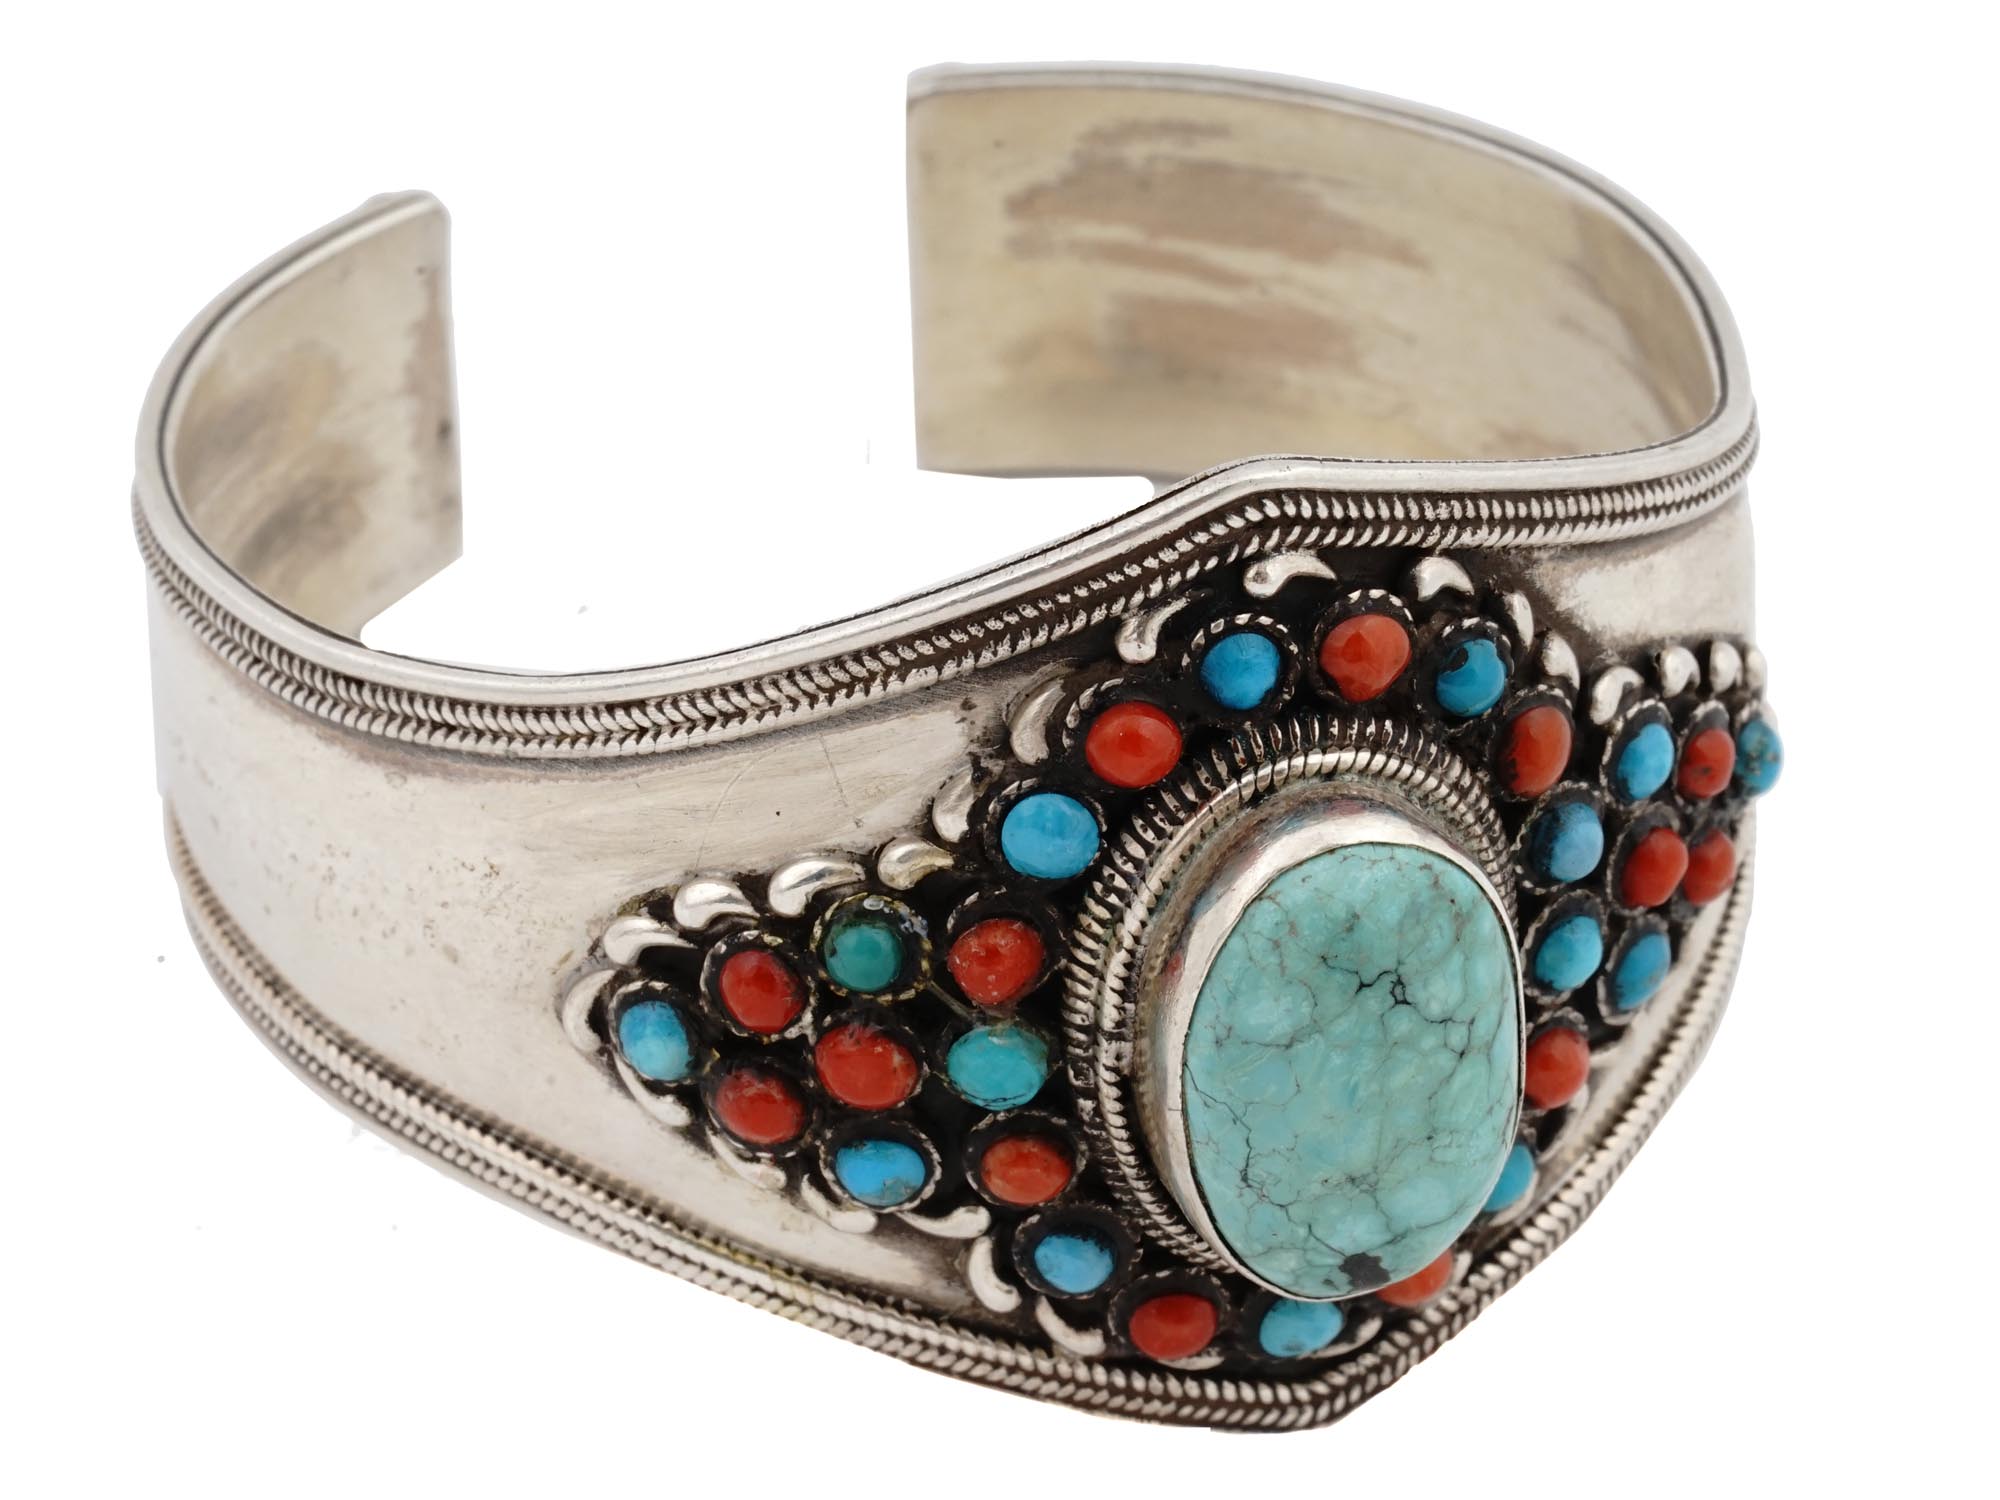 VINTAGE TIBETIAN TURQUOISE SILVER CUFF BRACELET PIC-1